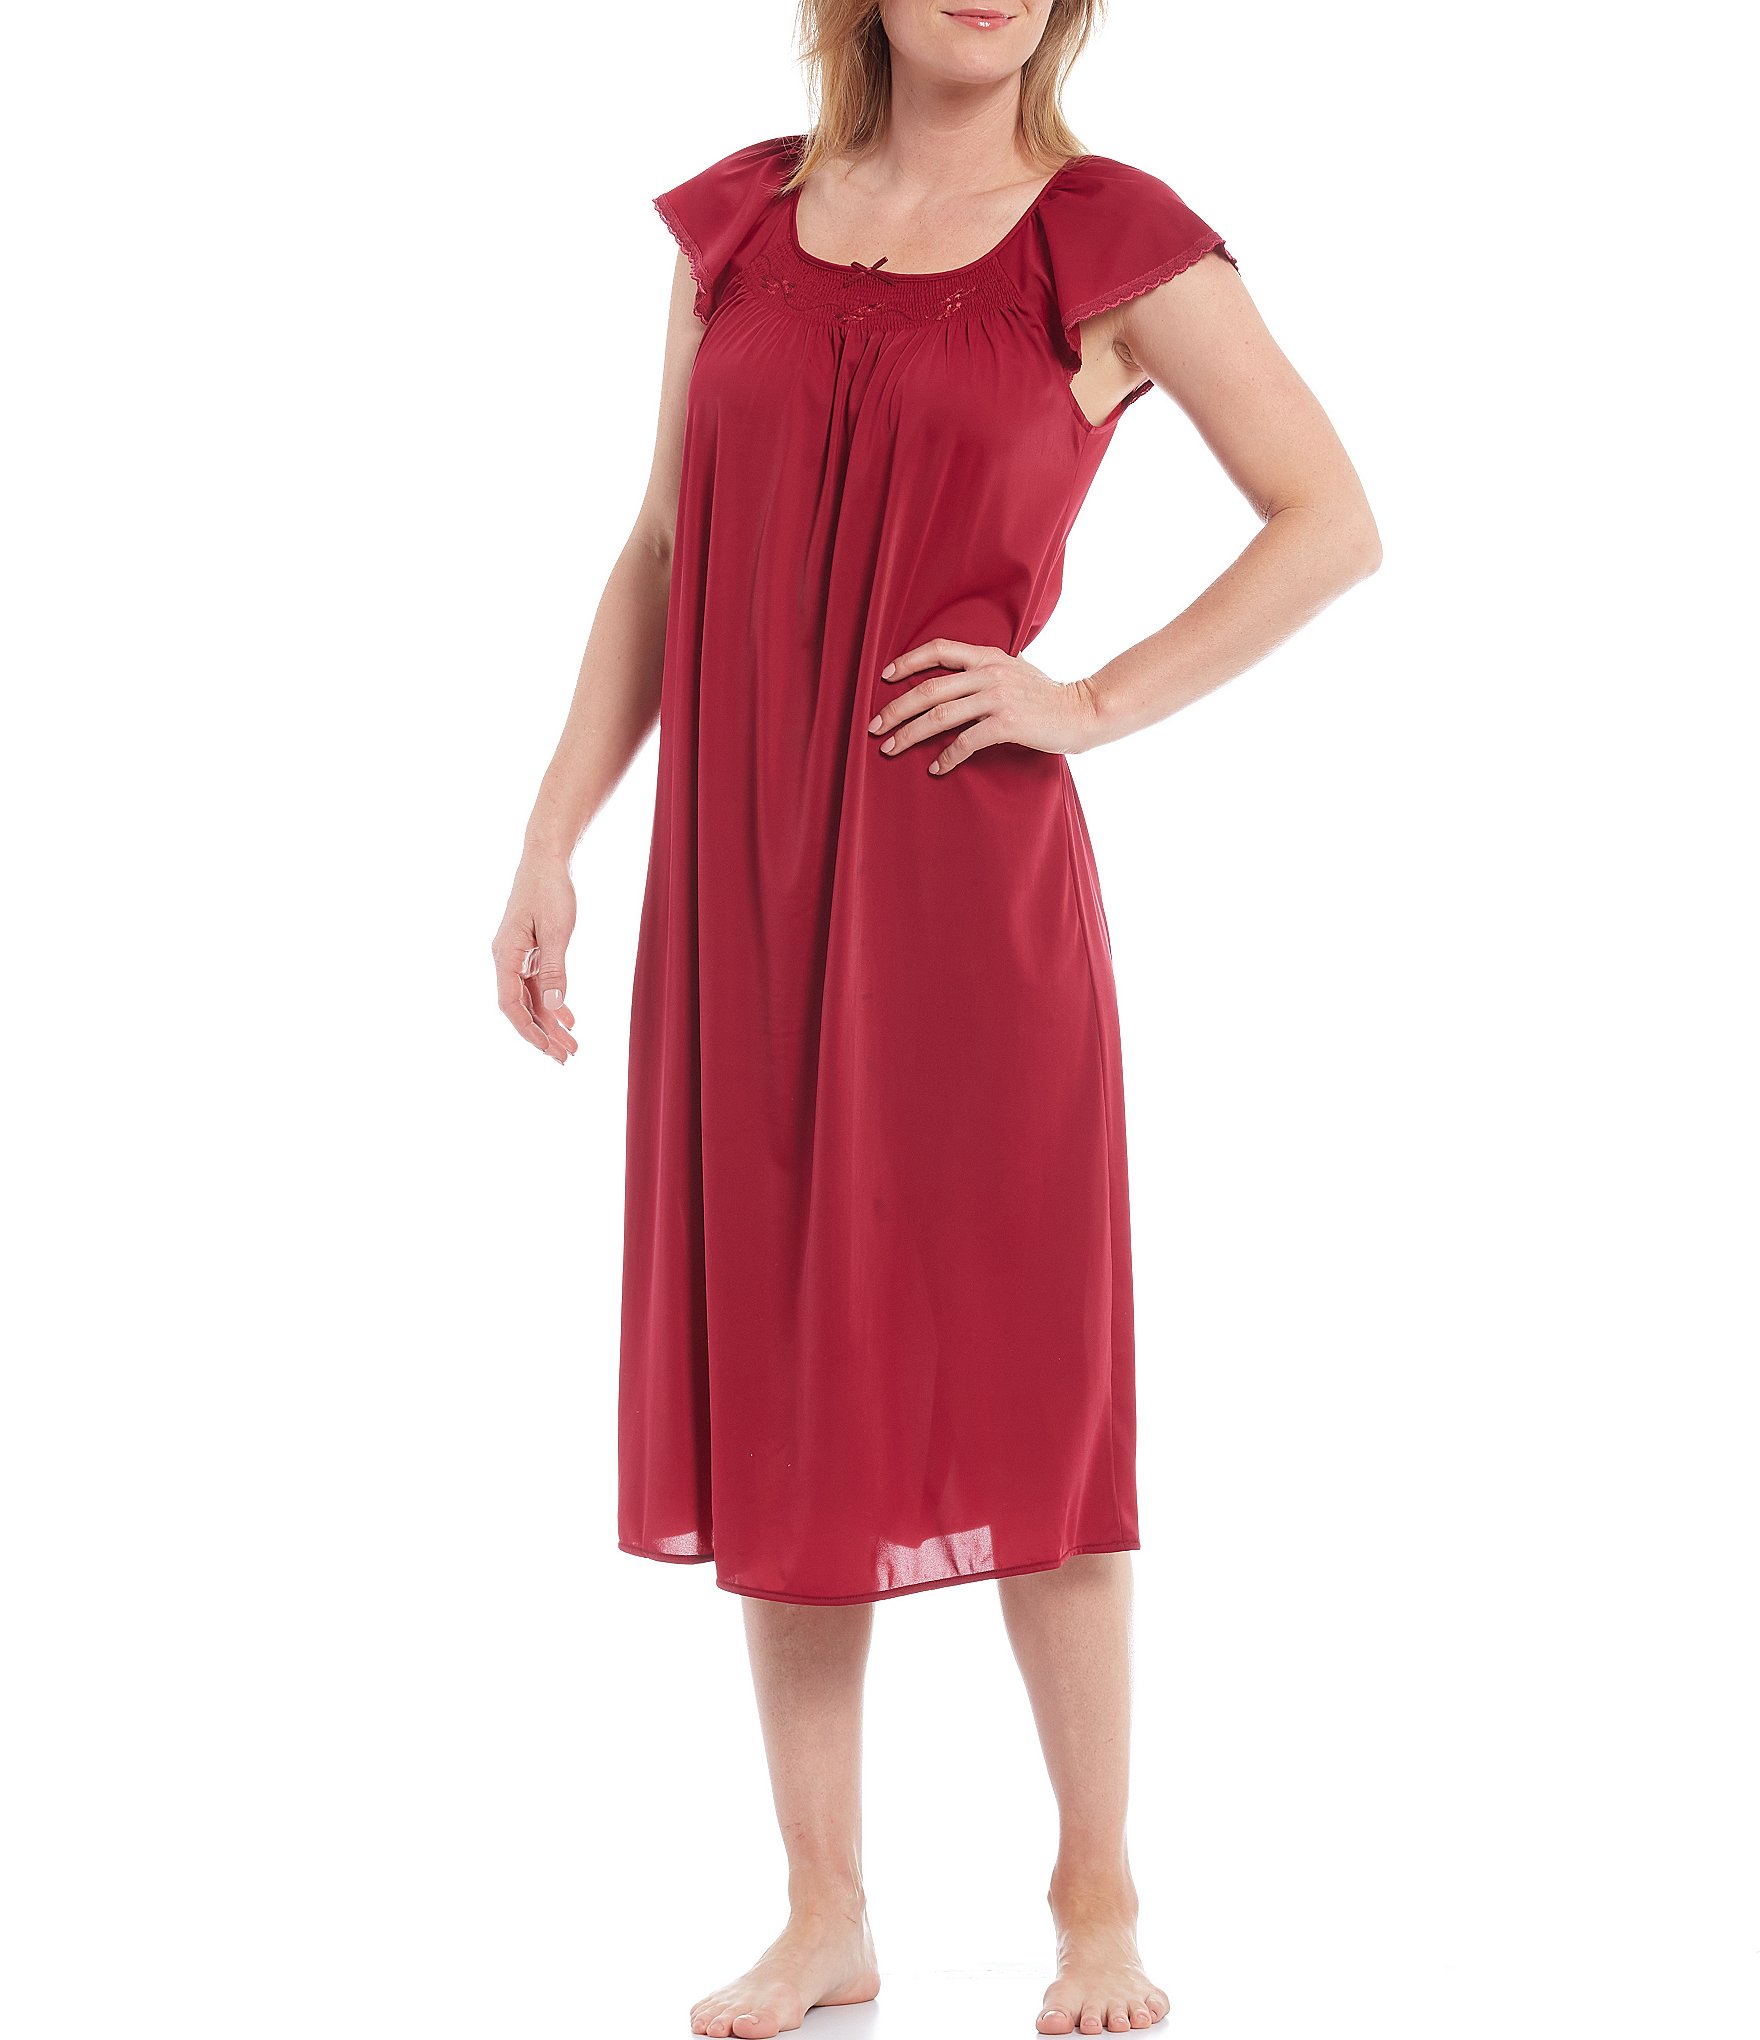 Ezi Satin Nightgowns for Women - Soft & Breathable Knee-Length Night Gowns  - Adult Womens Nightgown M - Plus Size,M,Red at Amazon Women's Clothing  store